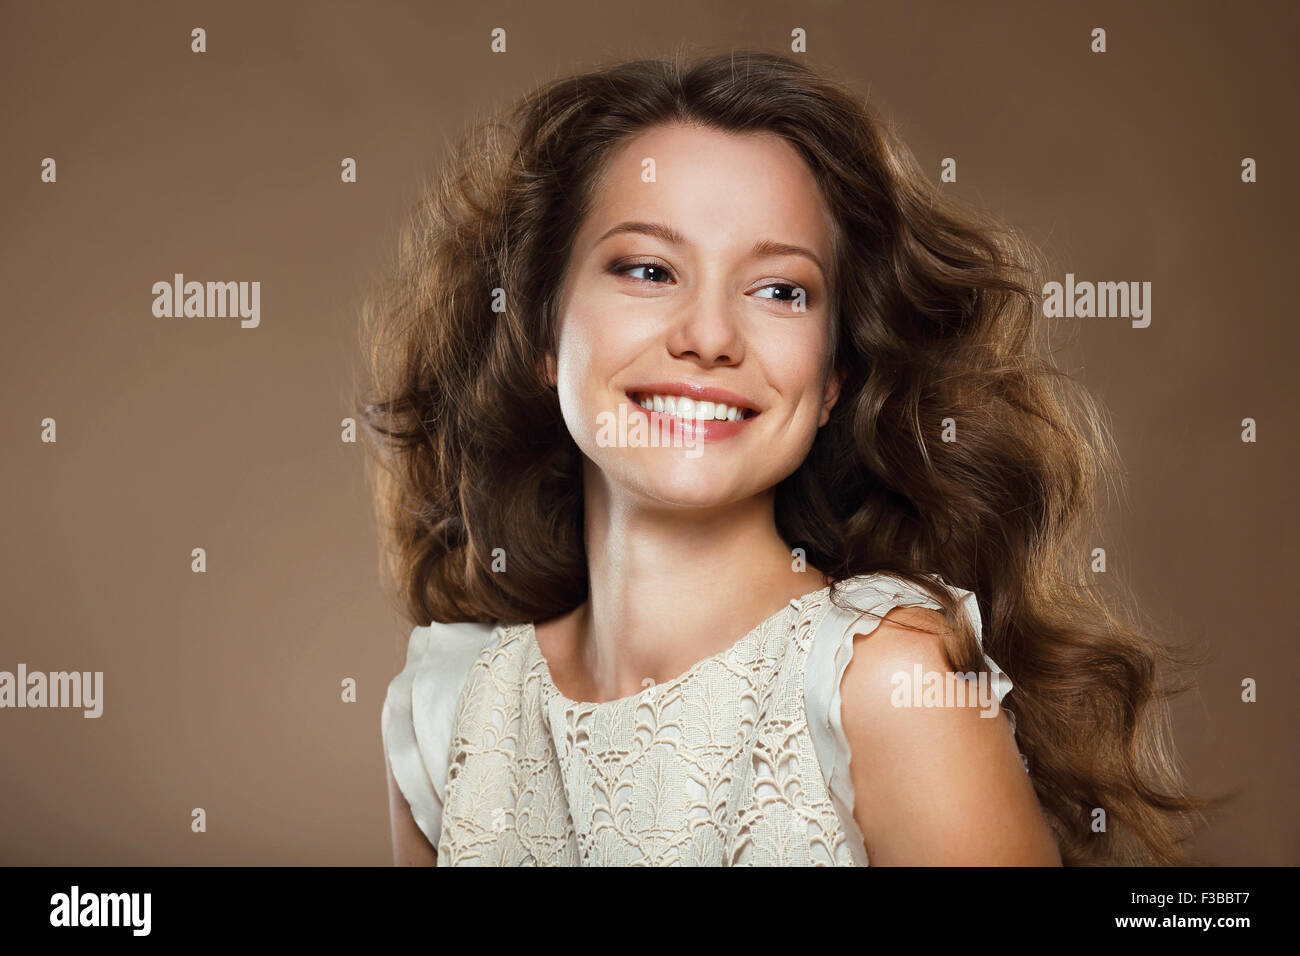 Toothy Smile. Portrait of Happy Lovely Brunette Stock Photo